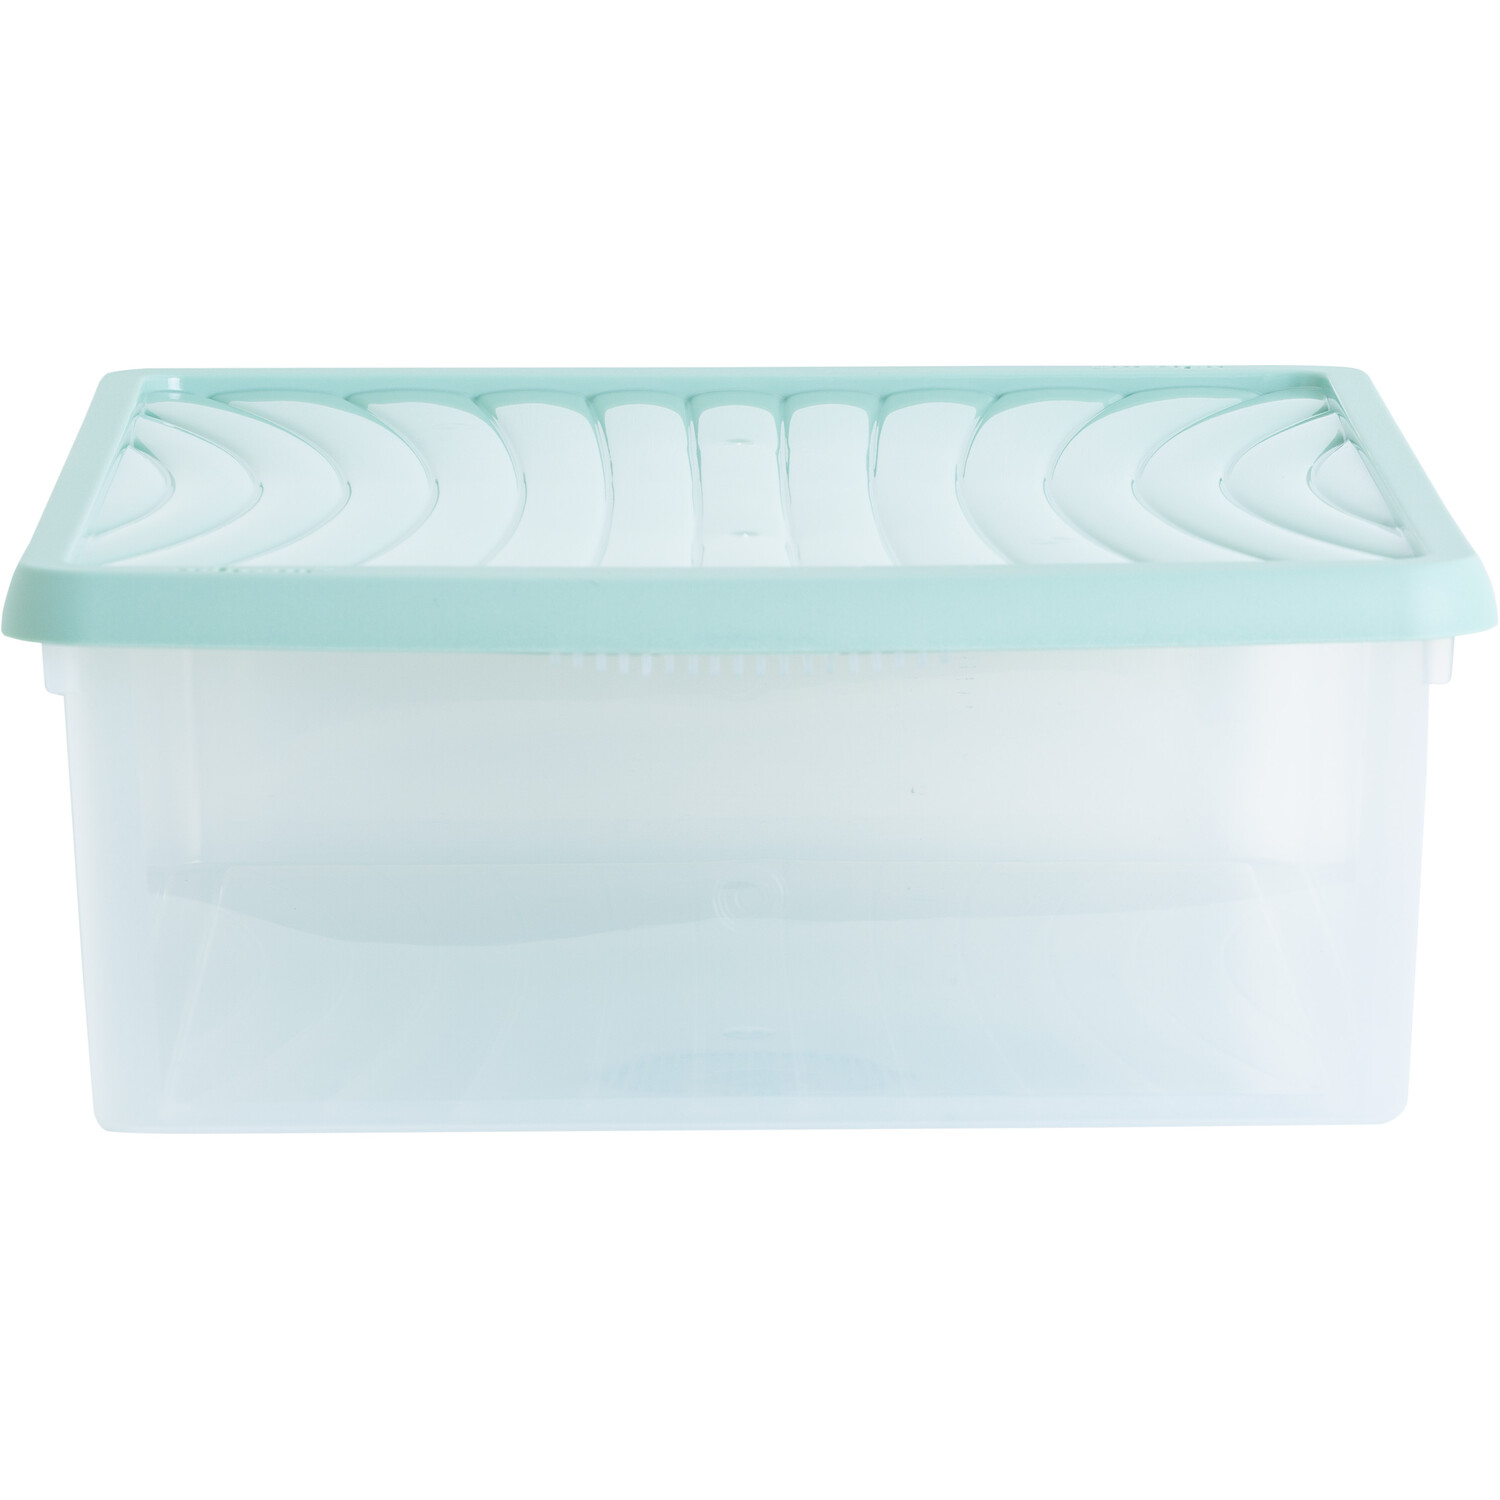 Single 23L Stackable Clear Storage Box with Lid in Assorted styles Image 2